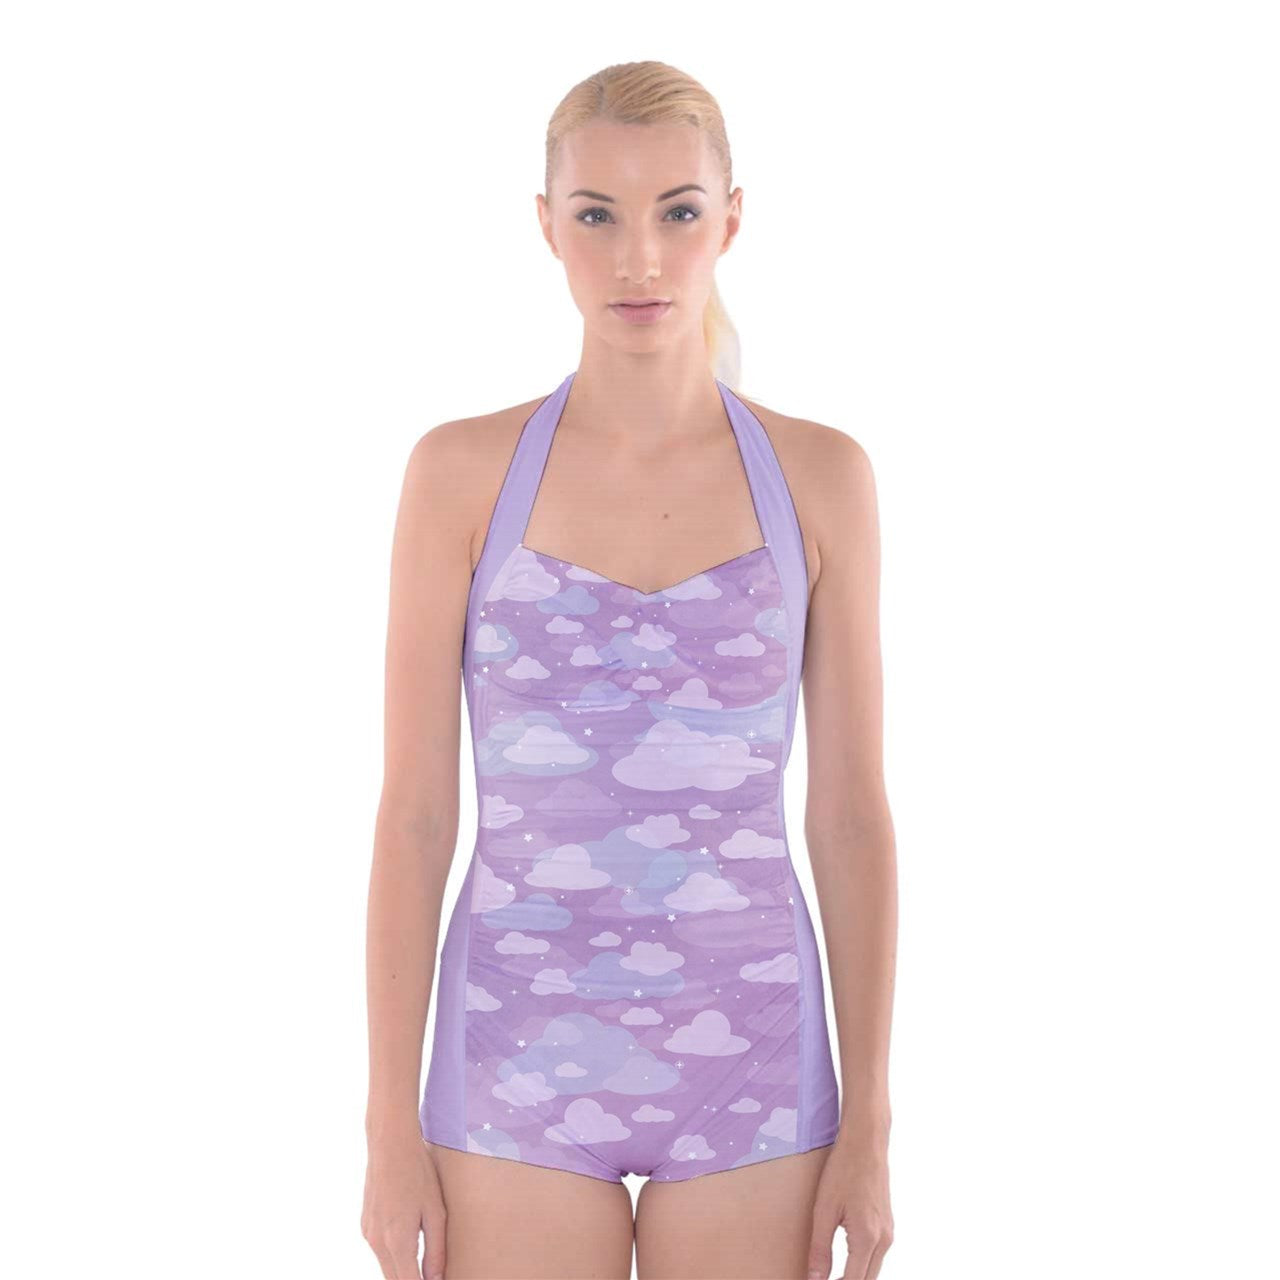 Starcrossed Skies Purple One Piece Ruched Halter Swimsuit